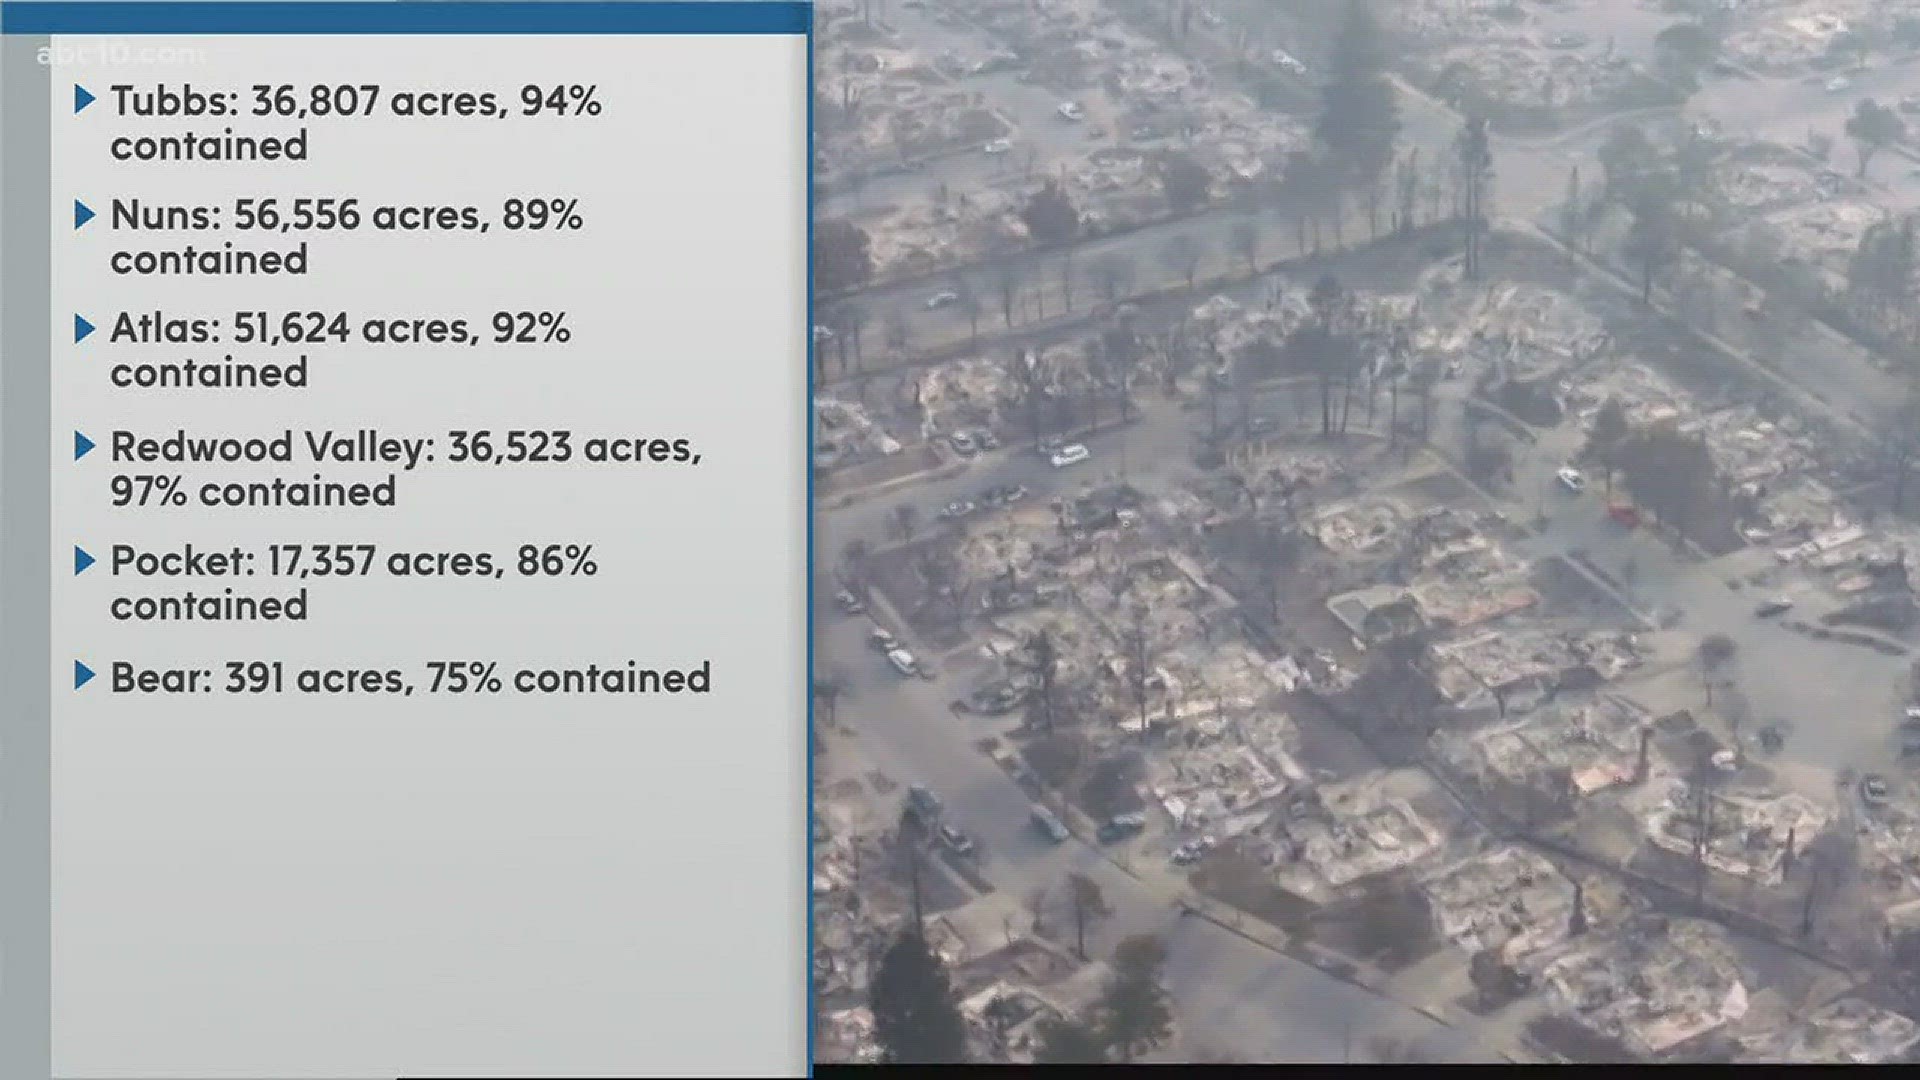 Northern California wildfires: The latest information